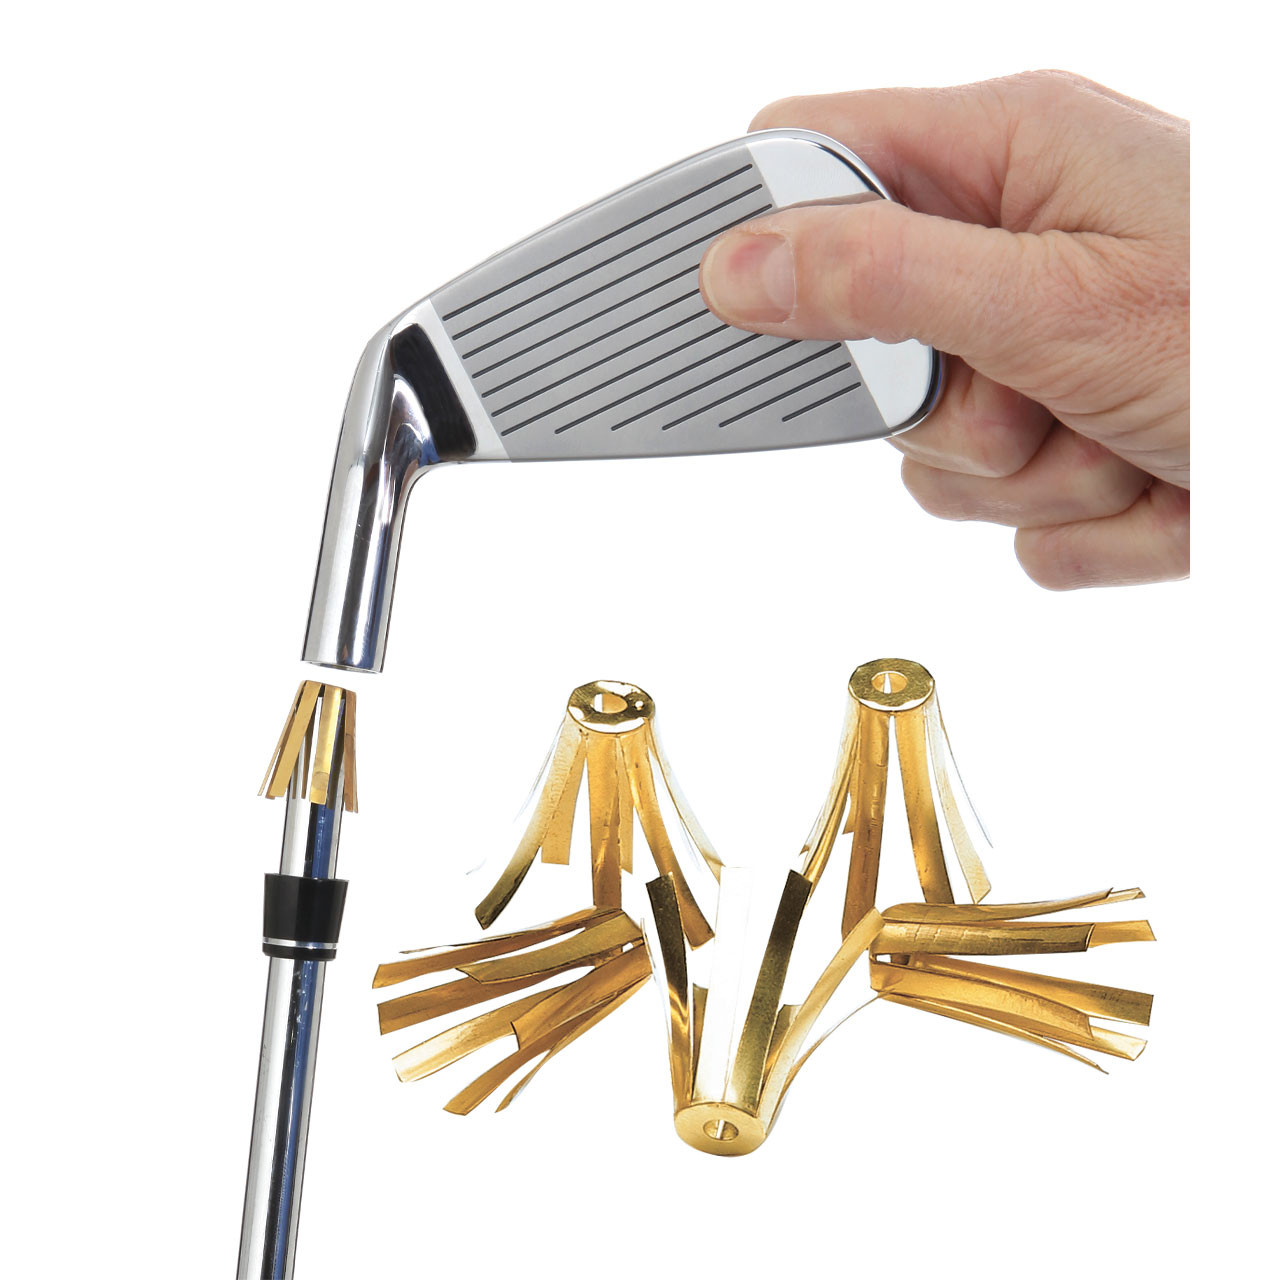 The GolfWorks Brass Adaptor Shims - The GolfWorks